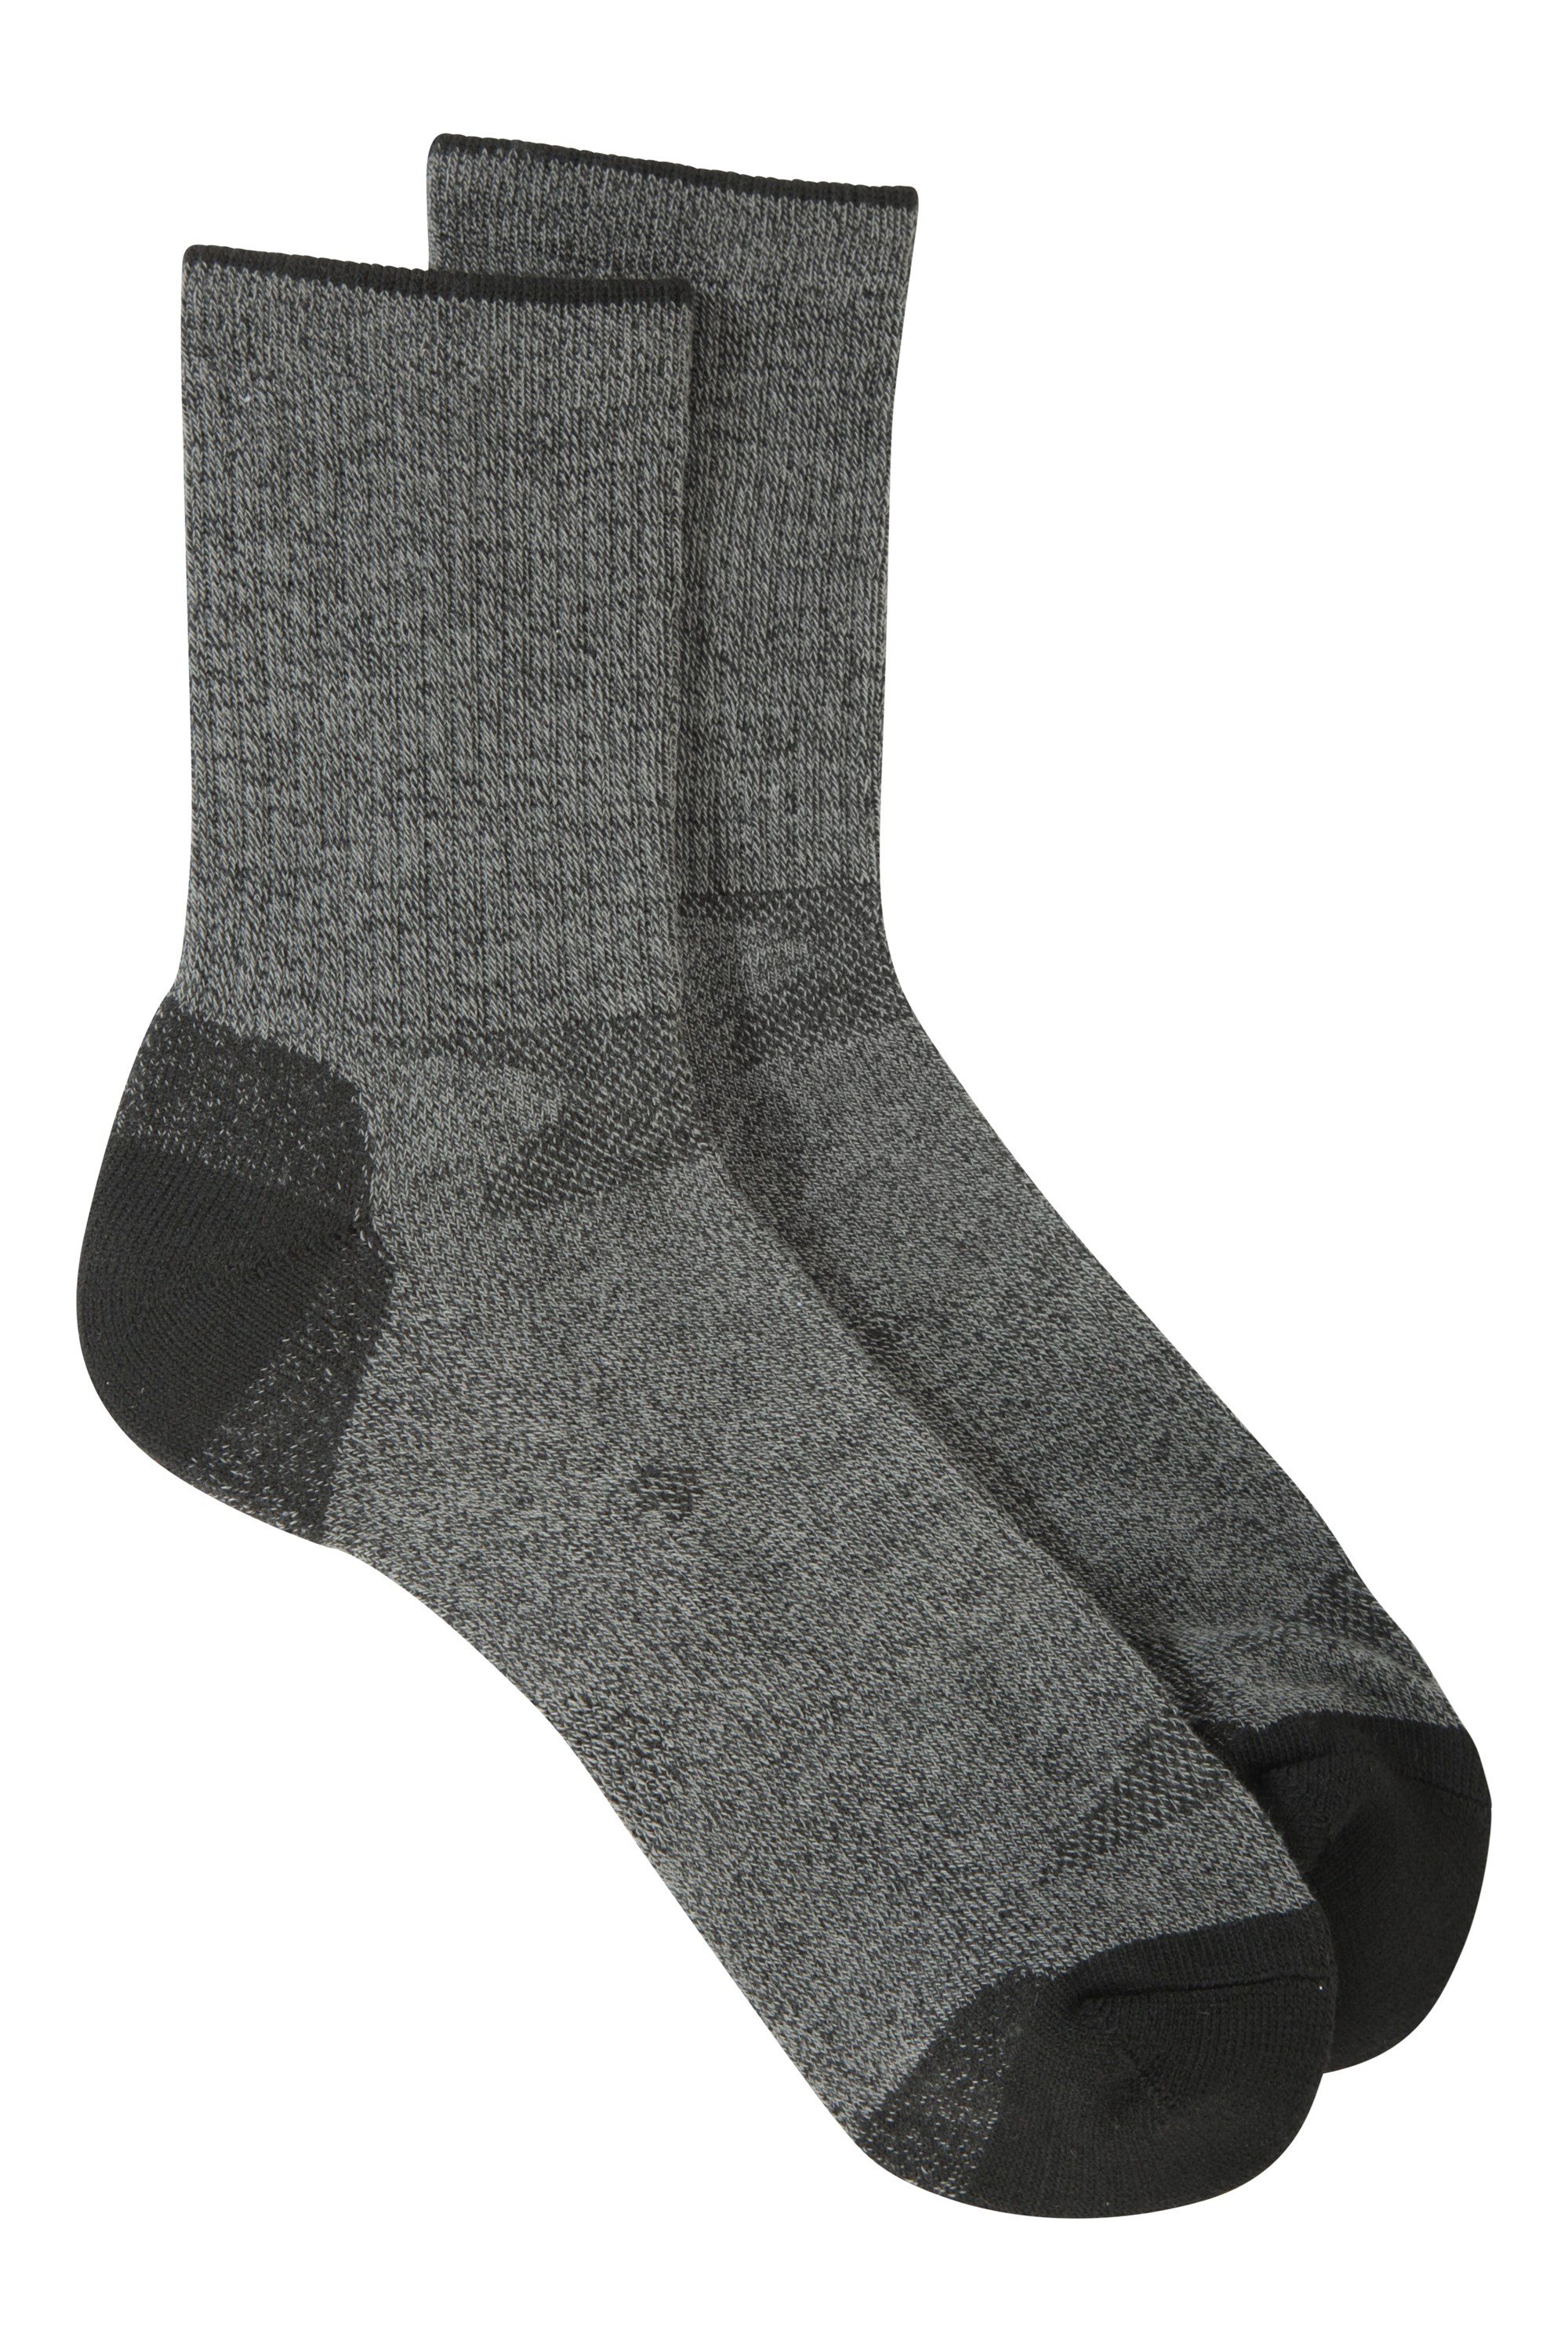 Chaussettes Isocool homme - Gris